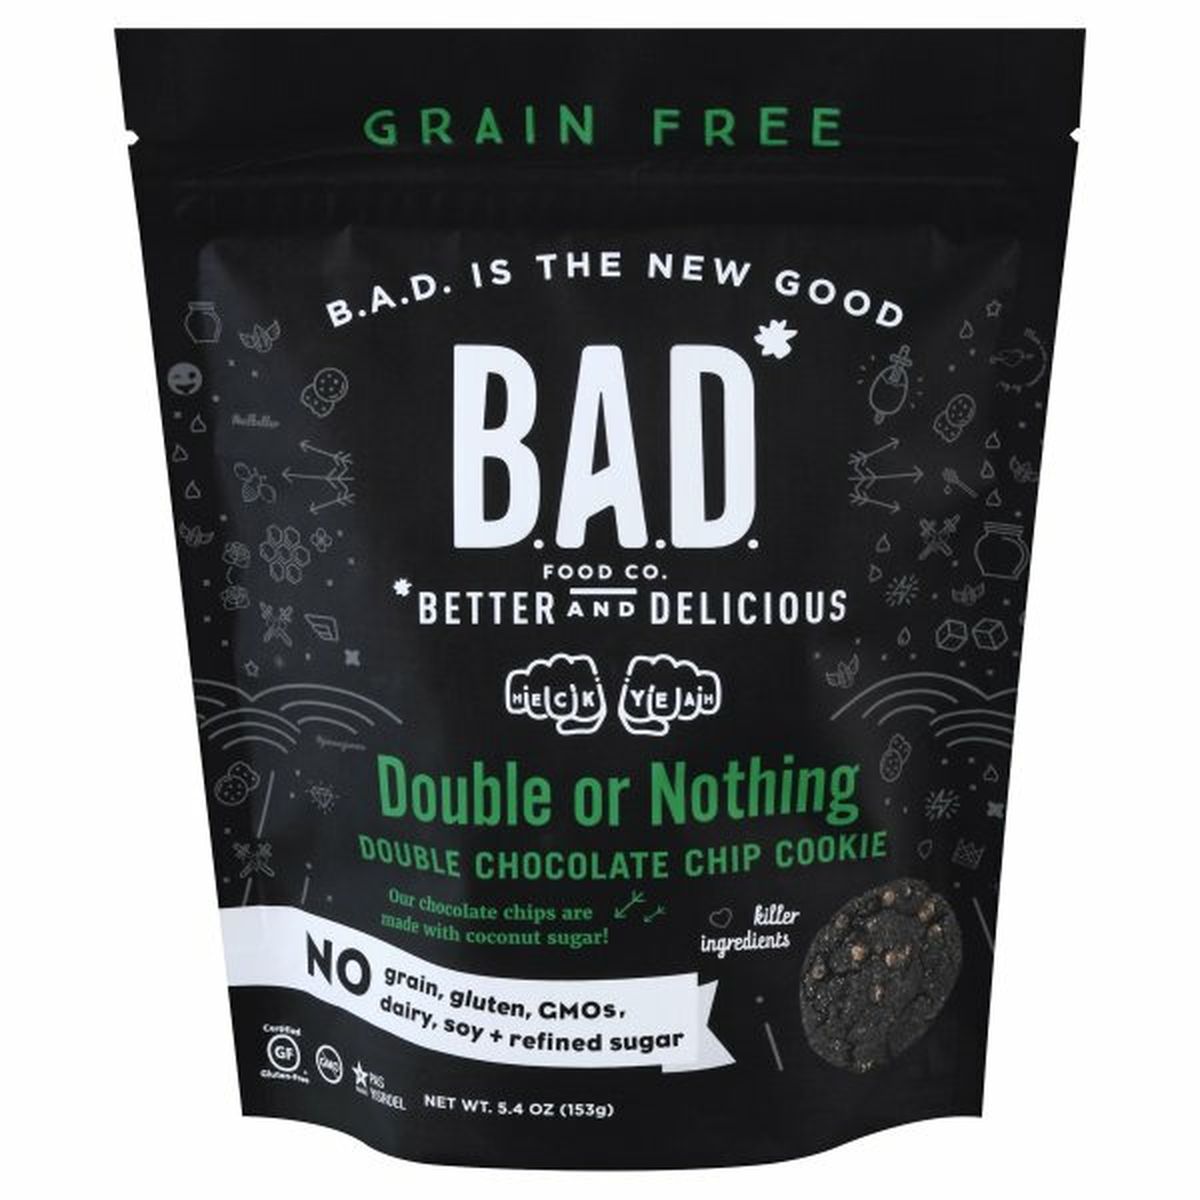 Calories in B.A.D. Food Co. Cookie, Grain Free, Double or Nothing